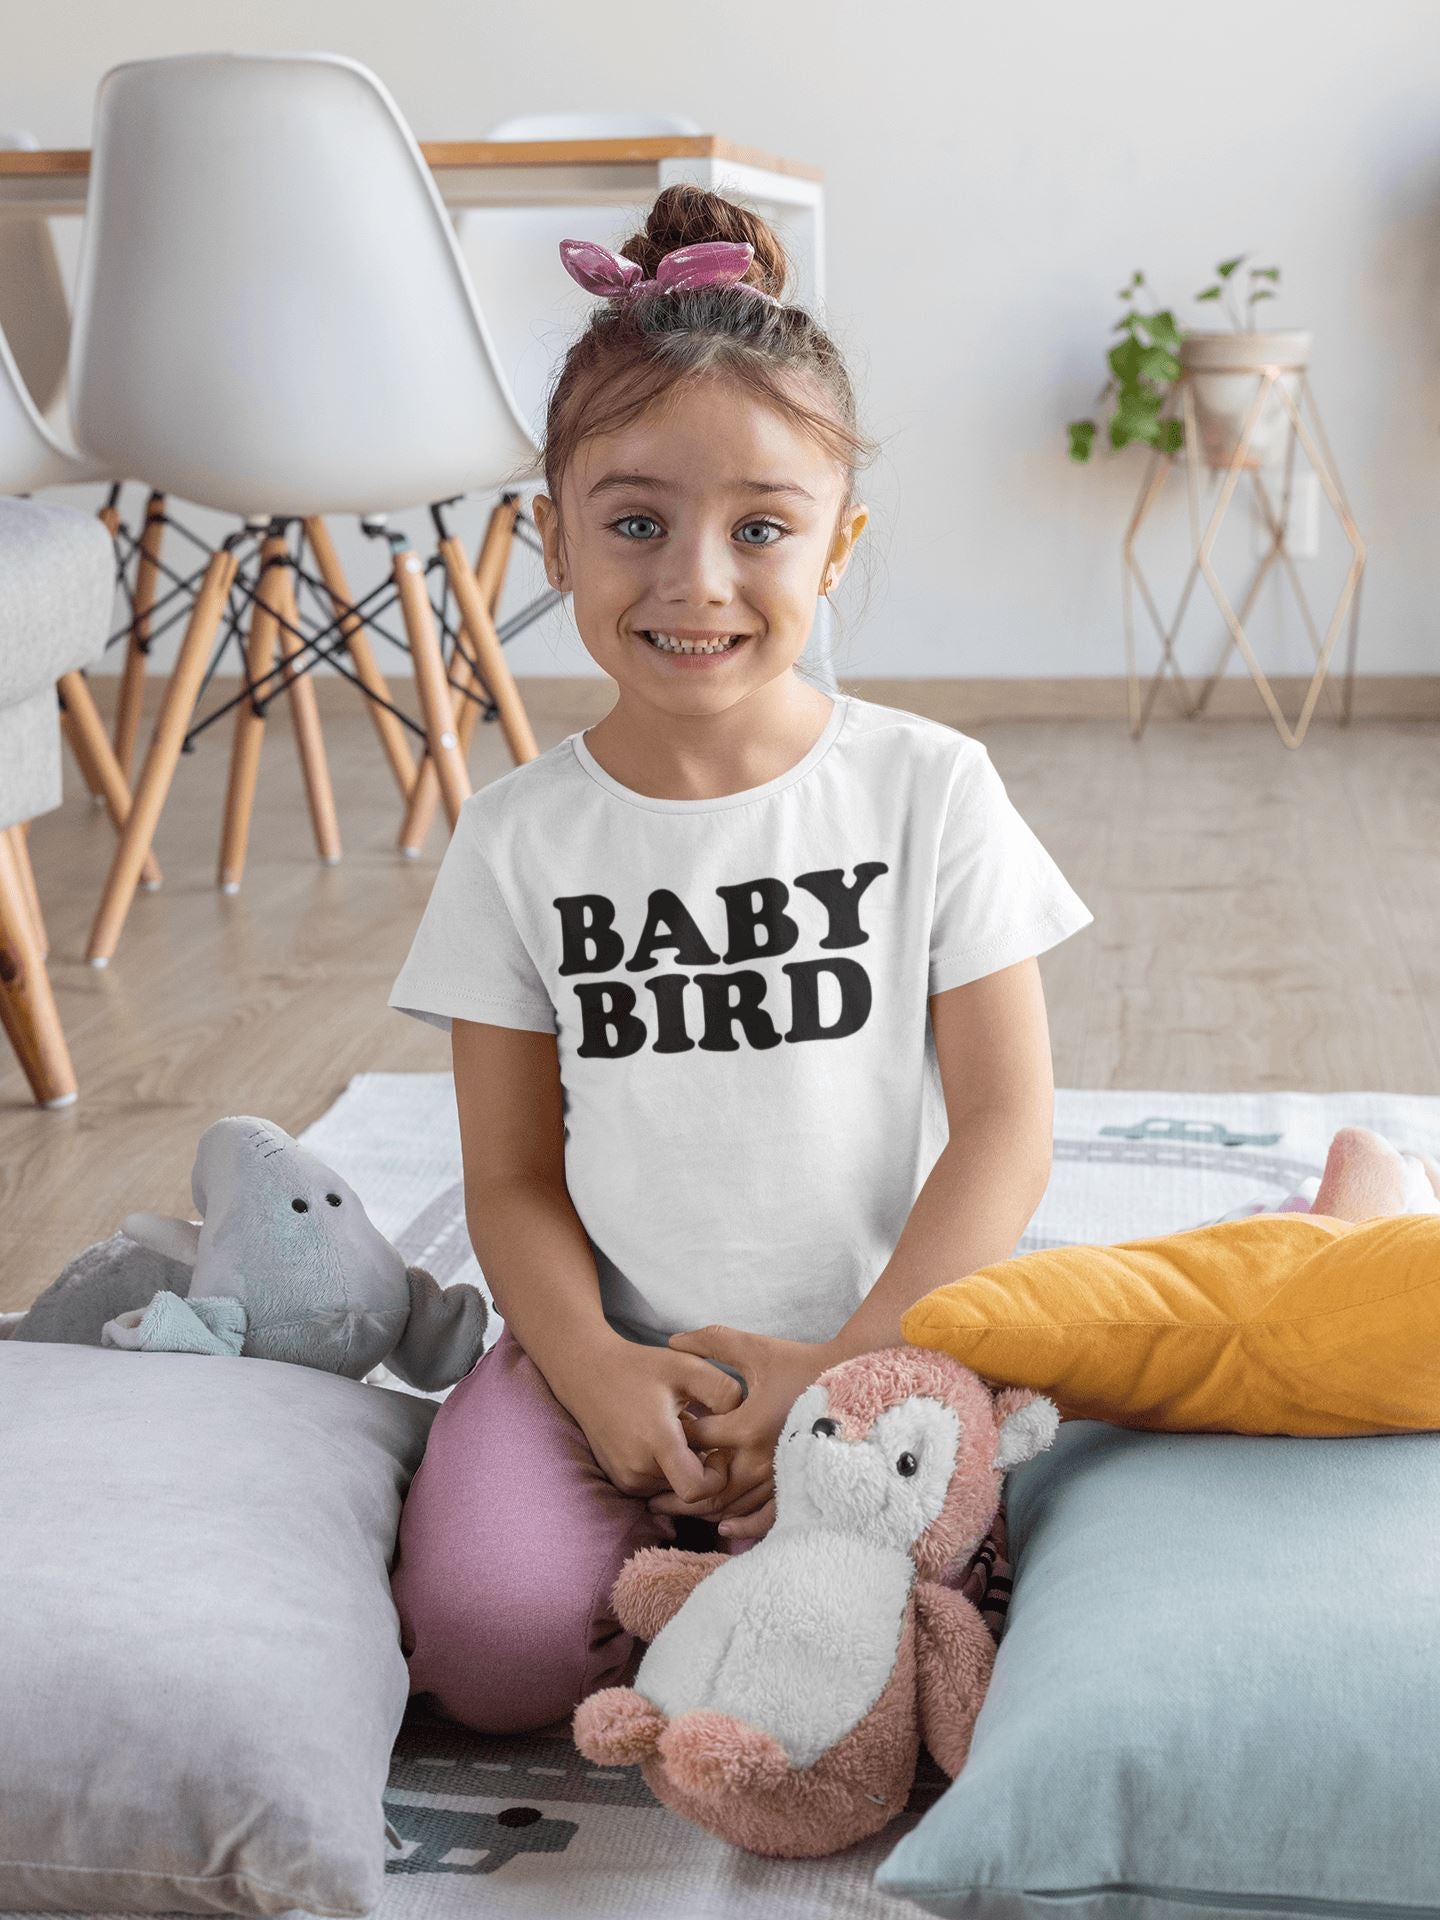 Baby Bird Special White T Shirt for Babies - Catch My Drift India  babies, baby, clothing, kids, made in india, onesie, onesies, parents, shirt, t shirt, toddler, toddlers, tshirt, white